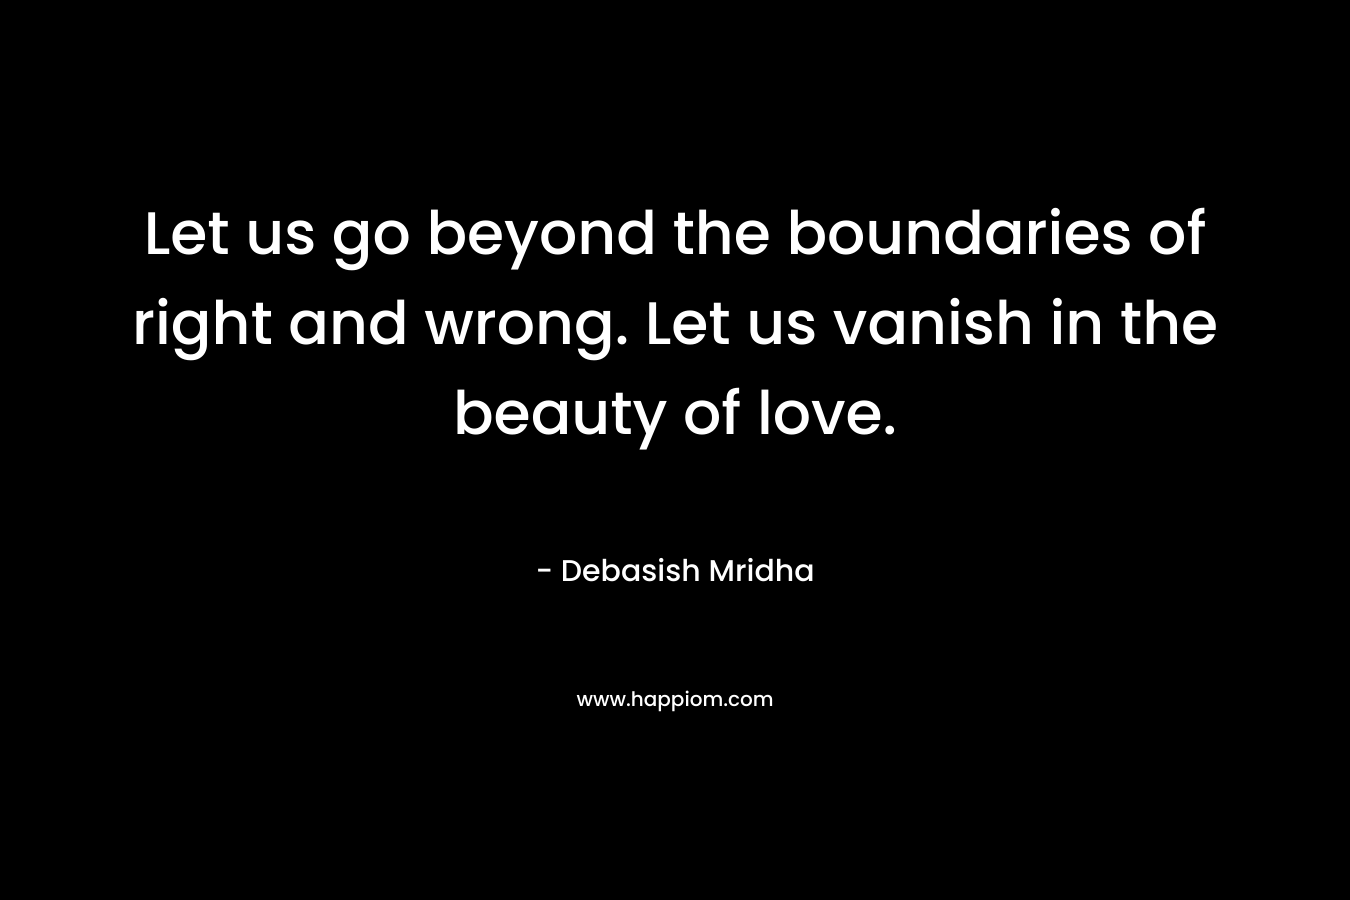 Let us go beyond the boundaries of right and wrong. Let us vanish in the beauty of love. – Debasish Mridha